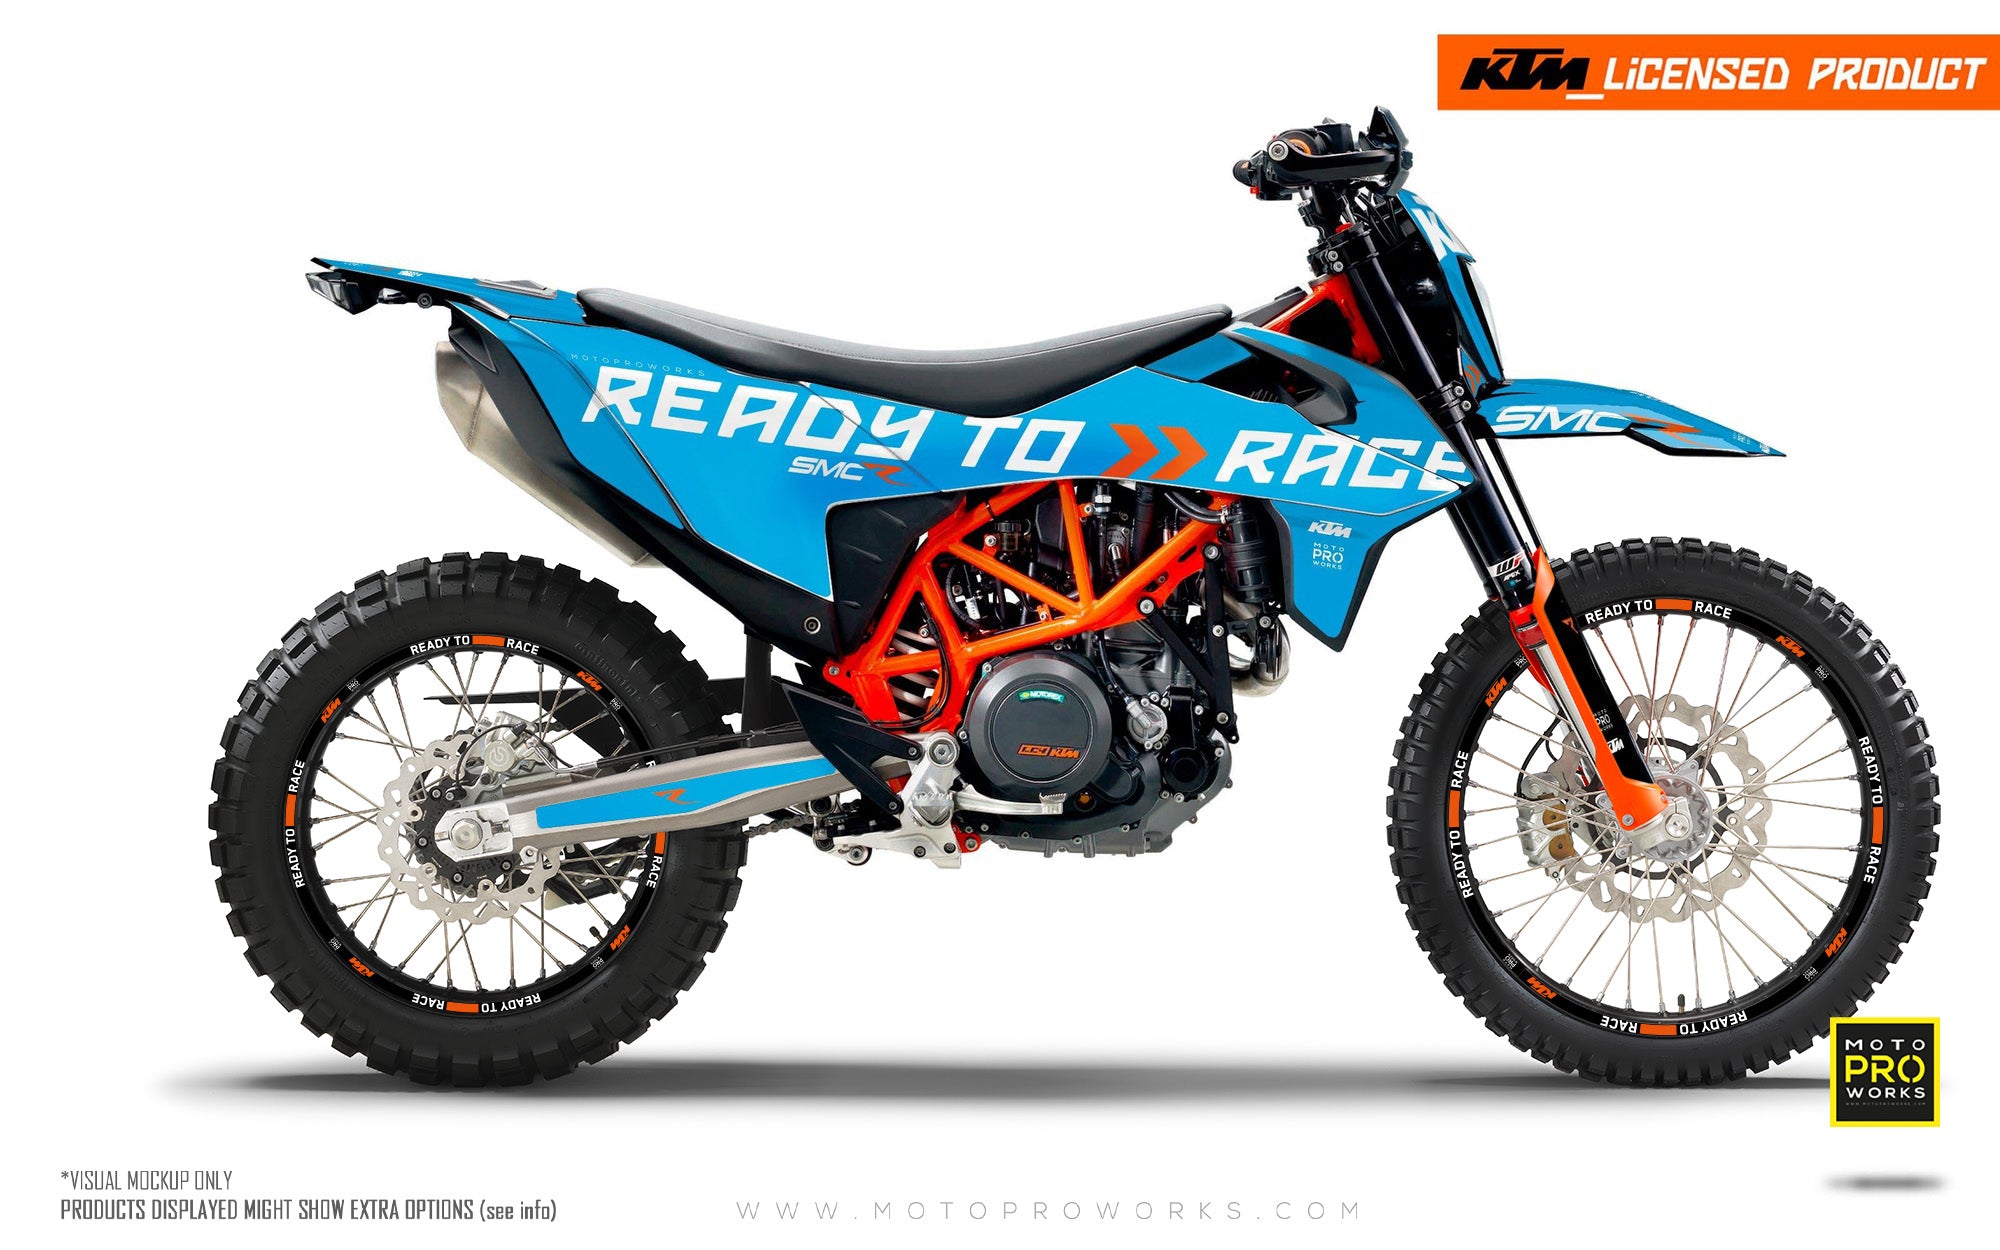 KTM GRAPHIC KIT - 690 SMC-R "Ready2Race" (Blue) - MotoProWorks | Decals and Bike Graphic kit